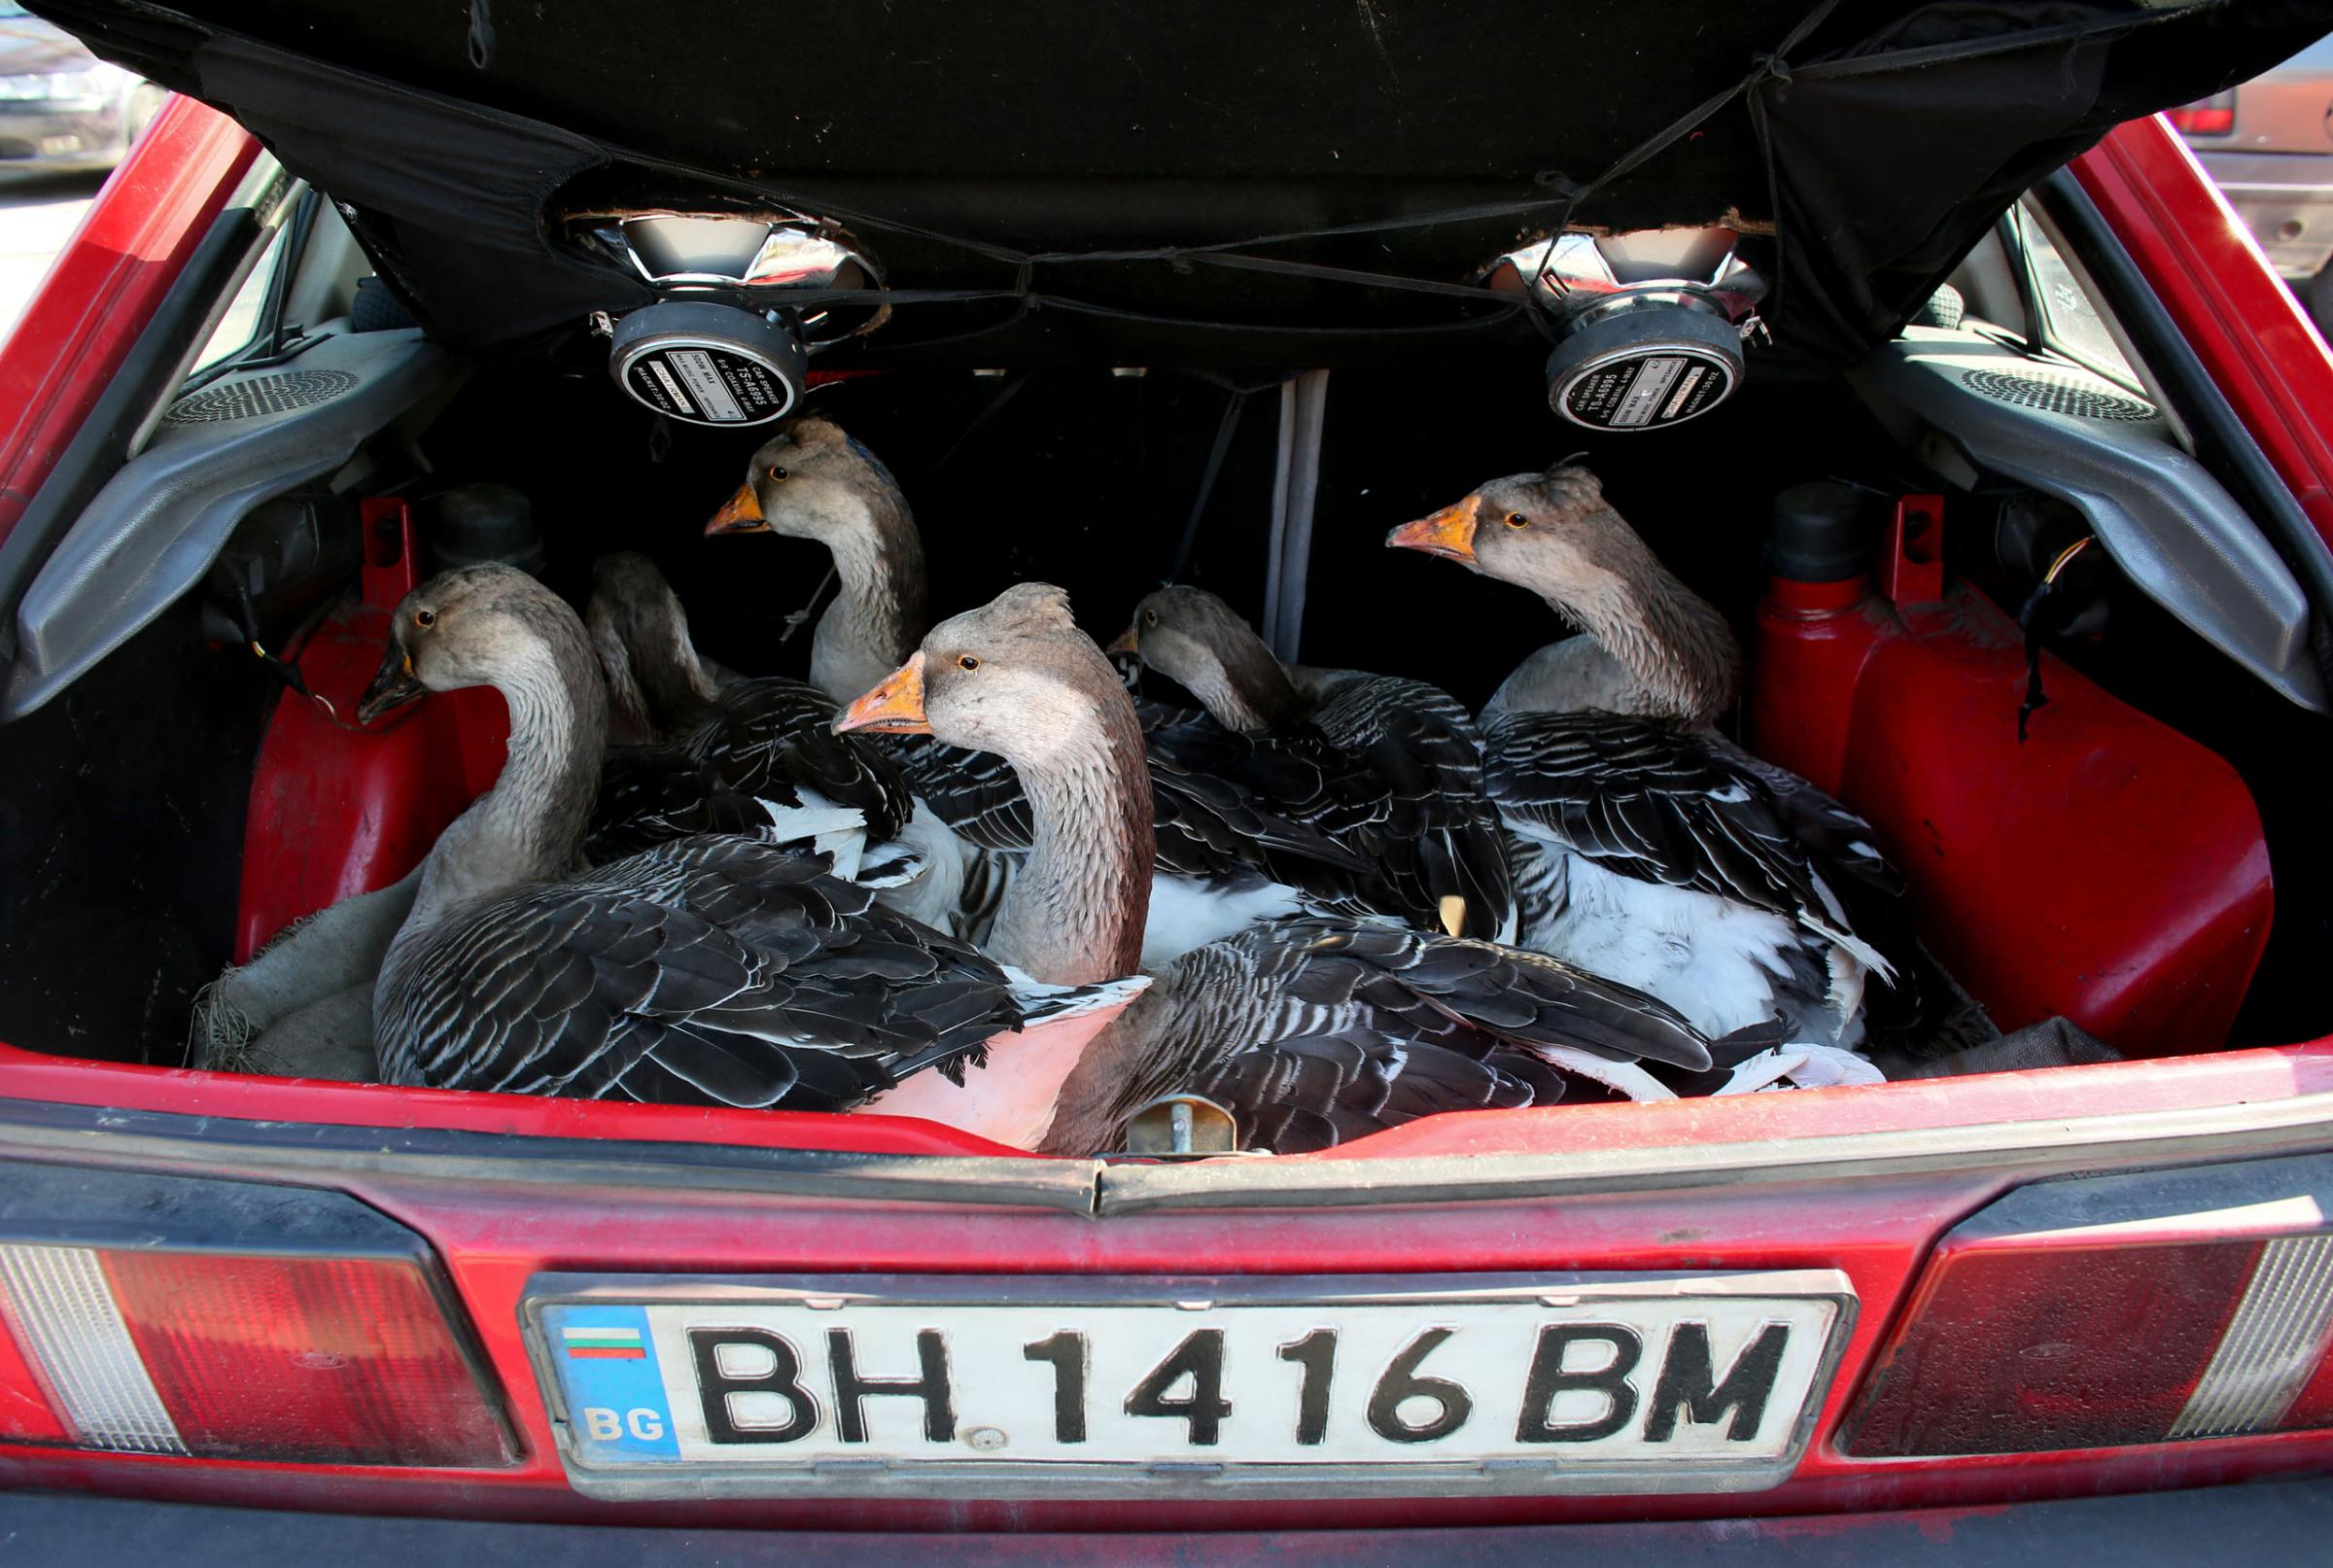 A woman sells geese from the trunk of her car, at an outdoor market in Vidin, Bulgaria on October 18th, 2014. Many Bulgarians sell personal belongings, fruit and vegetables grown at home, or resell goods as a supplement to their primary earnings. This photo is from a project that aims to gauge the state and effect of democracy in the former Soviet satellite nation Bulgaria, two and a half decades after the fall of the Berlin Wall. The story of democracy in Bulgaria at age 25 is a cautionary tale about transplanting one-size-fits-all Western values to a nation still undergoing social and economic upheaval. Bulgaria is still one of the poorest, most corrupt nations in the European Union, its post-1989 hopes wilted by political instability, high crime rates and skyrocketing inflation. While Bulgarians can now freely vote and protest without much threat to their freedom, their new oppressor is corruption - which is at a 15 year high, across political and civil sectors alike. The ennui is so casually etched on the passerby's face that it becomes routine - one that fits in sadly well against a startling backdrop of rotting architecture, joblessness, and a vast population decline. Despite what democracy has changed in Bulgaria, the daily struggles of its populace remain largely untouched, trapped in a post-communist time capsule.This project was supported by a grant from The Pulitzer Center on Crisis Reporting. Photo by: Yana PaskovaCopyright © Yana Paskova 2014